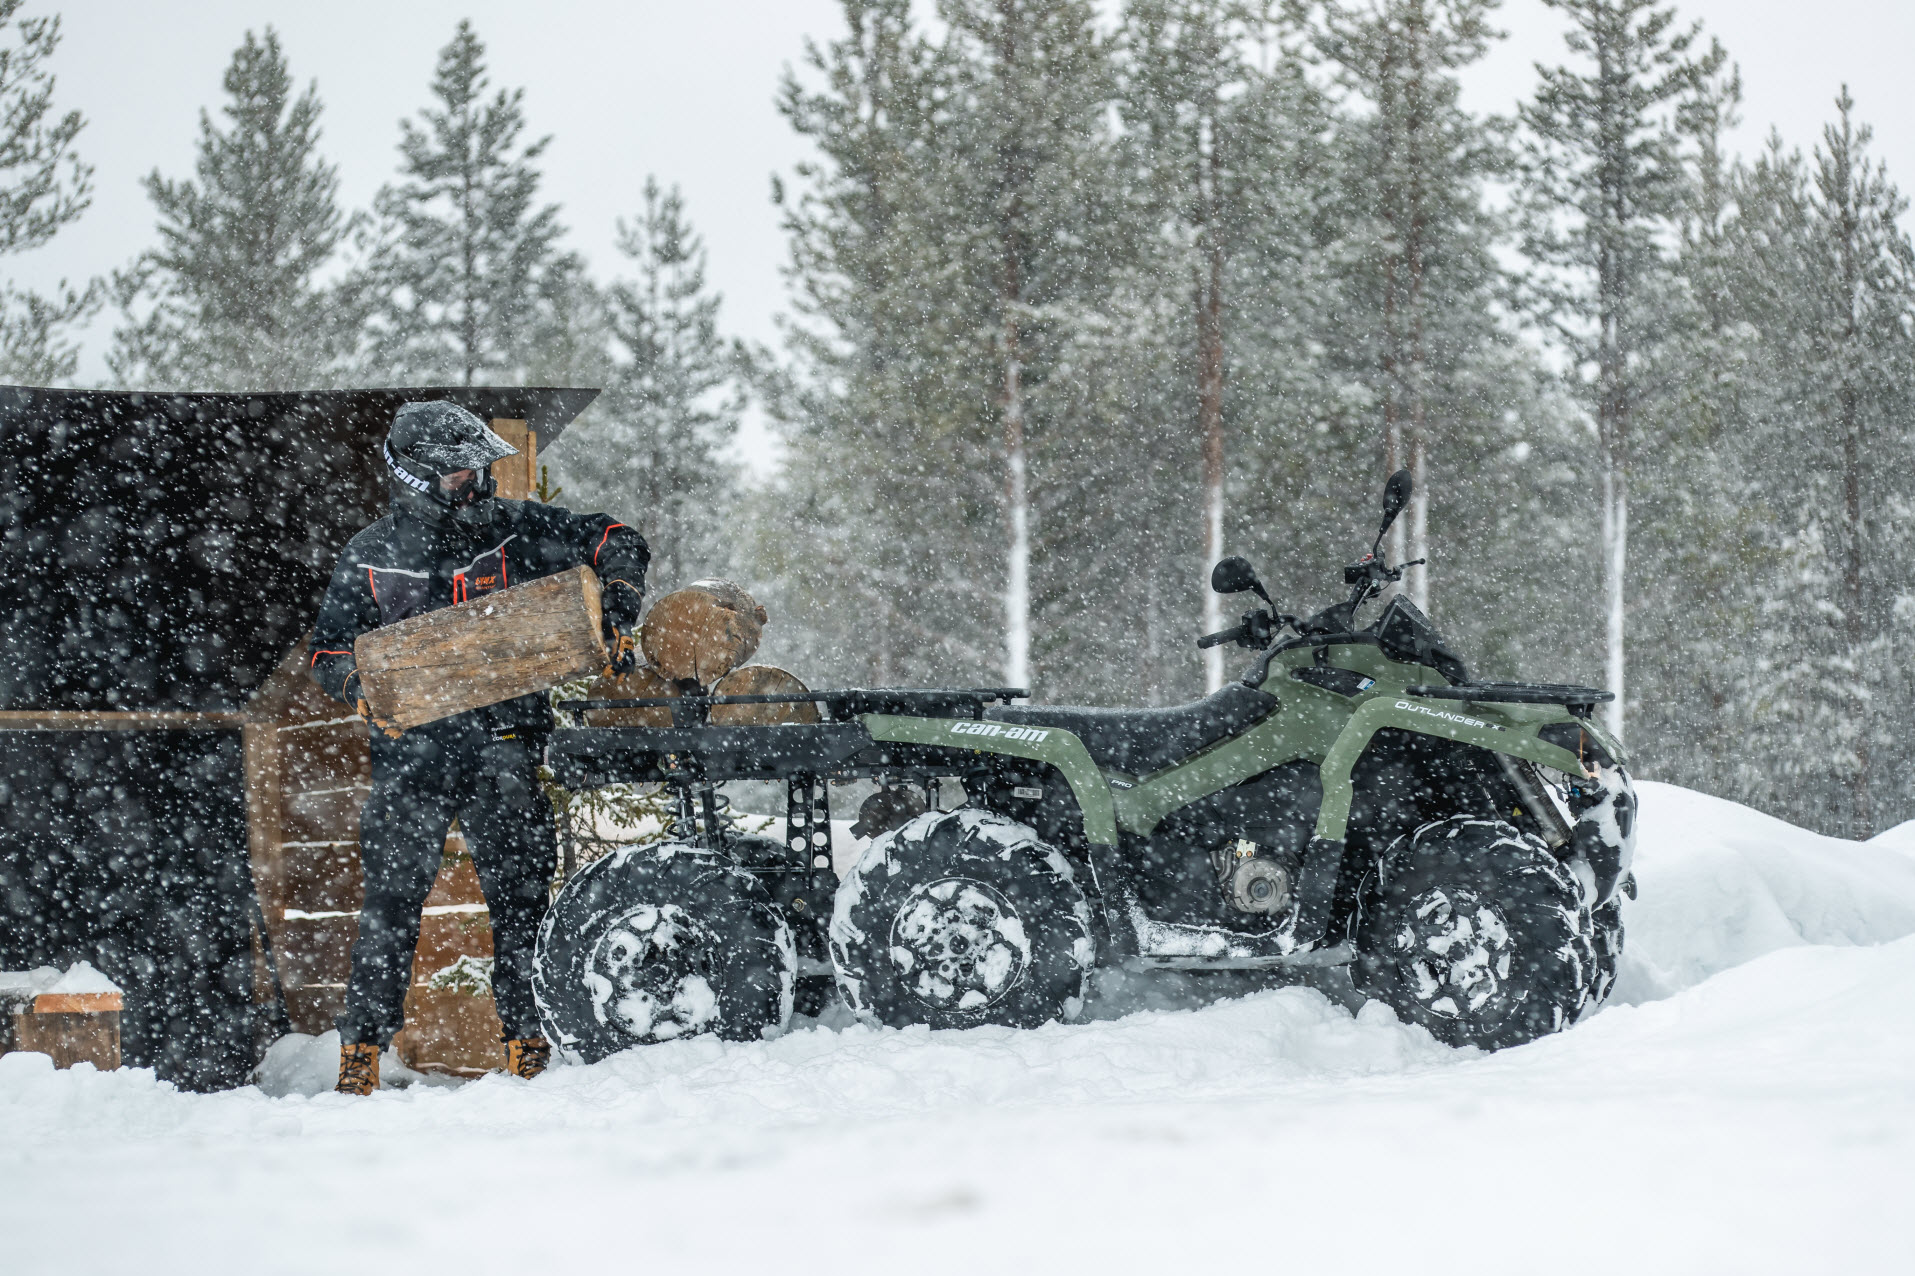 Can-Am Outlander 6x6 laster vedkubber i snøfall